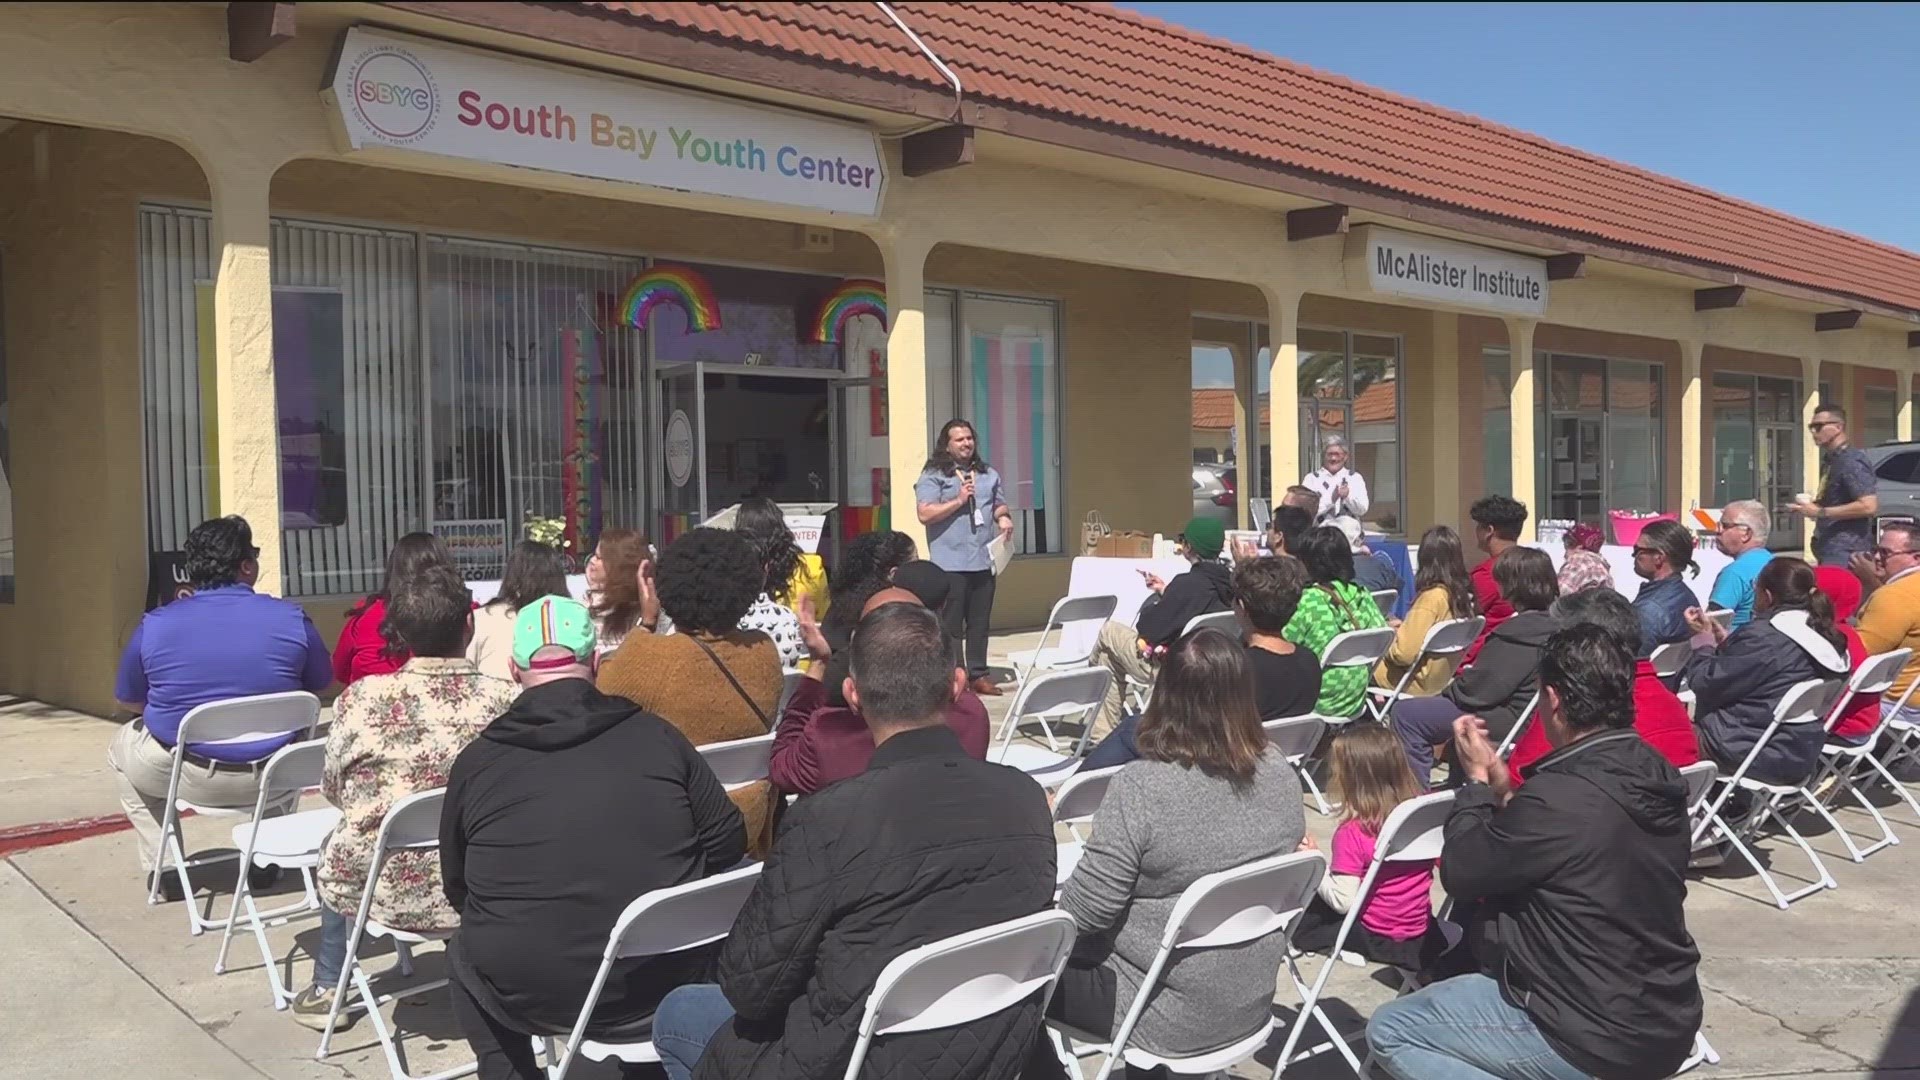 Full of vibrant colors, visitors say the South Bay Youth Center has become a place of acceptance. It offers education, counseling & activities for people age 10-24.